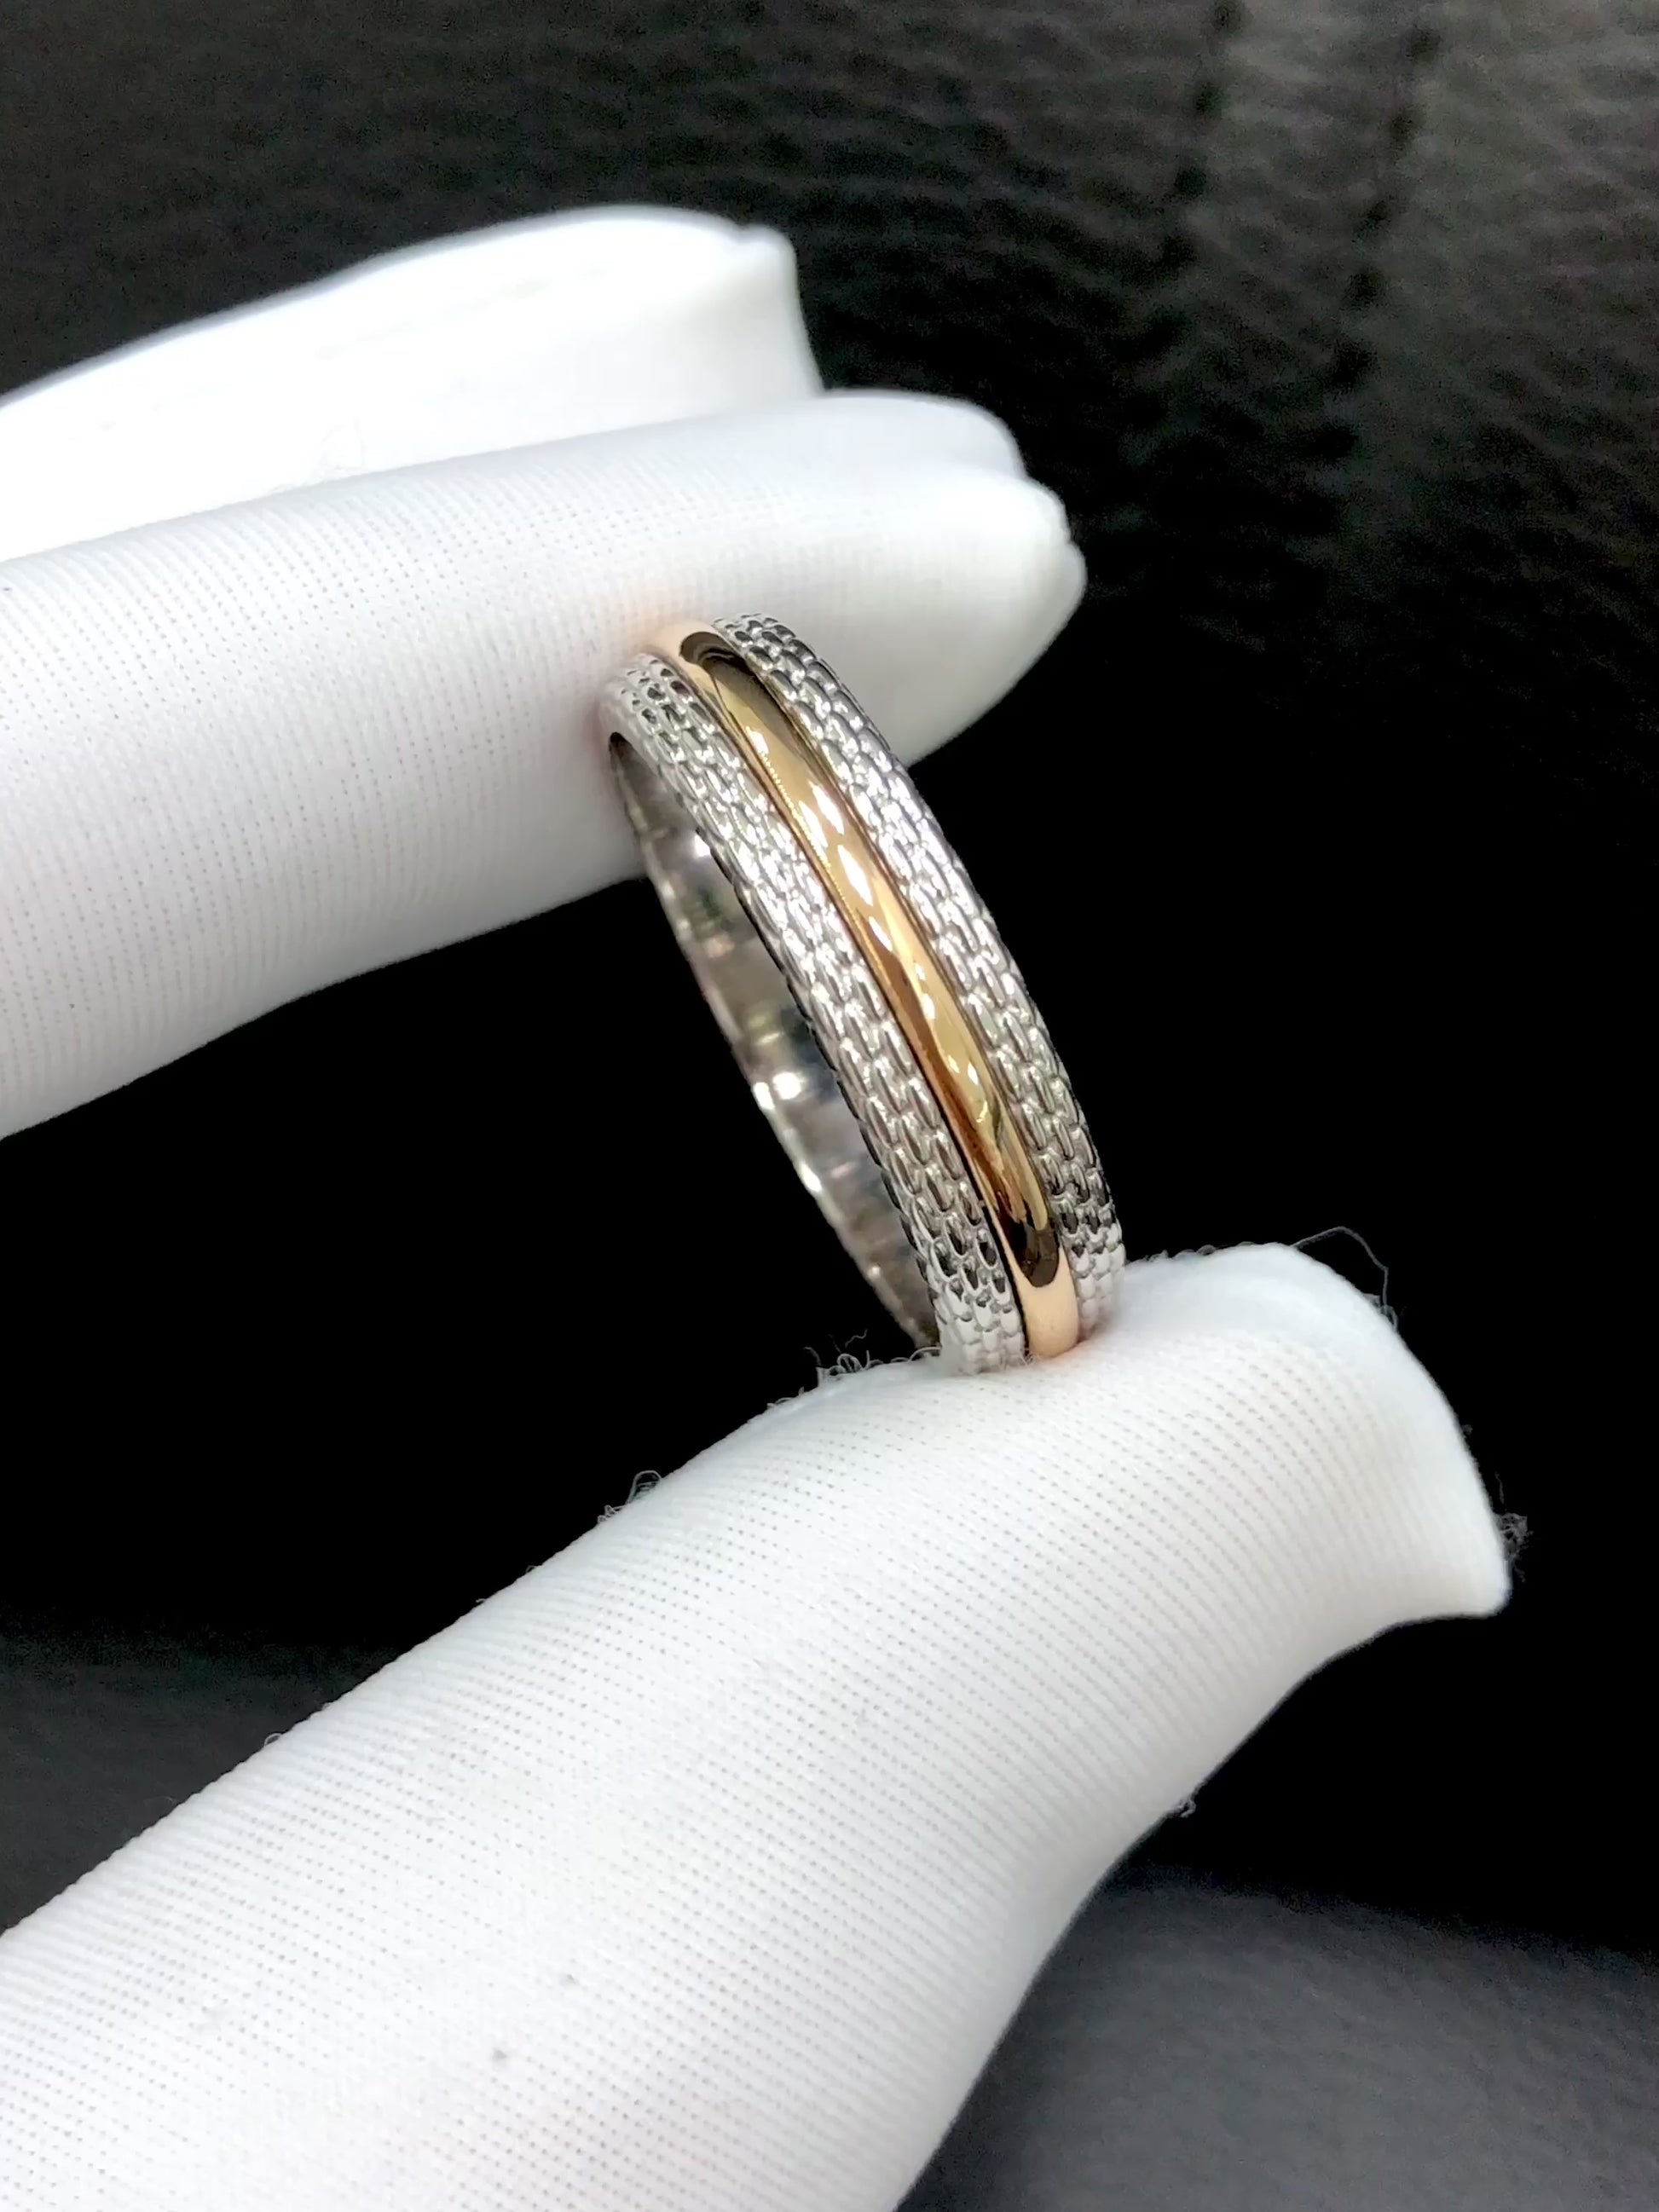 Mens wedding ring with unique design. Mens wedding band white and gold. 14k gold wedding ring.Textured wedding band. Ring fir him. Two-tone men's wedding band. Gold wedding ring fer men.